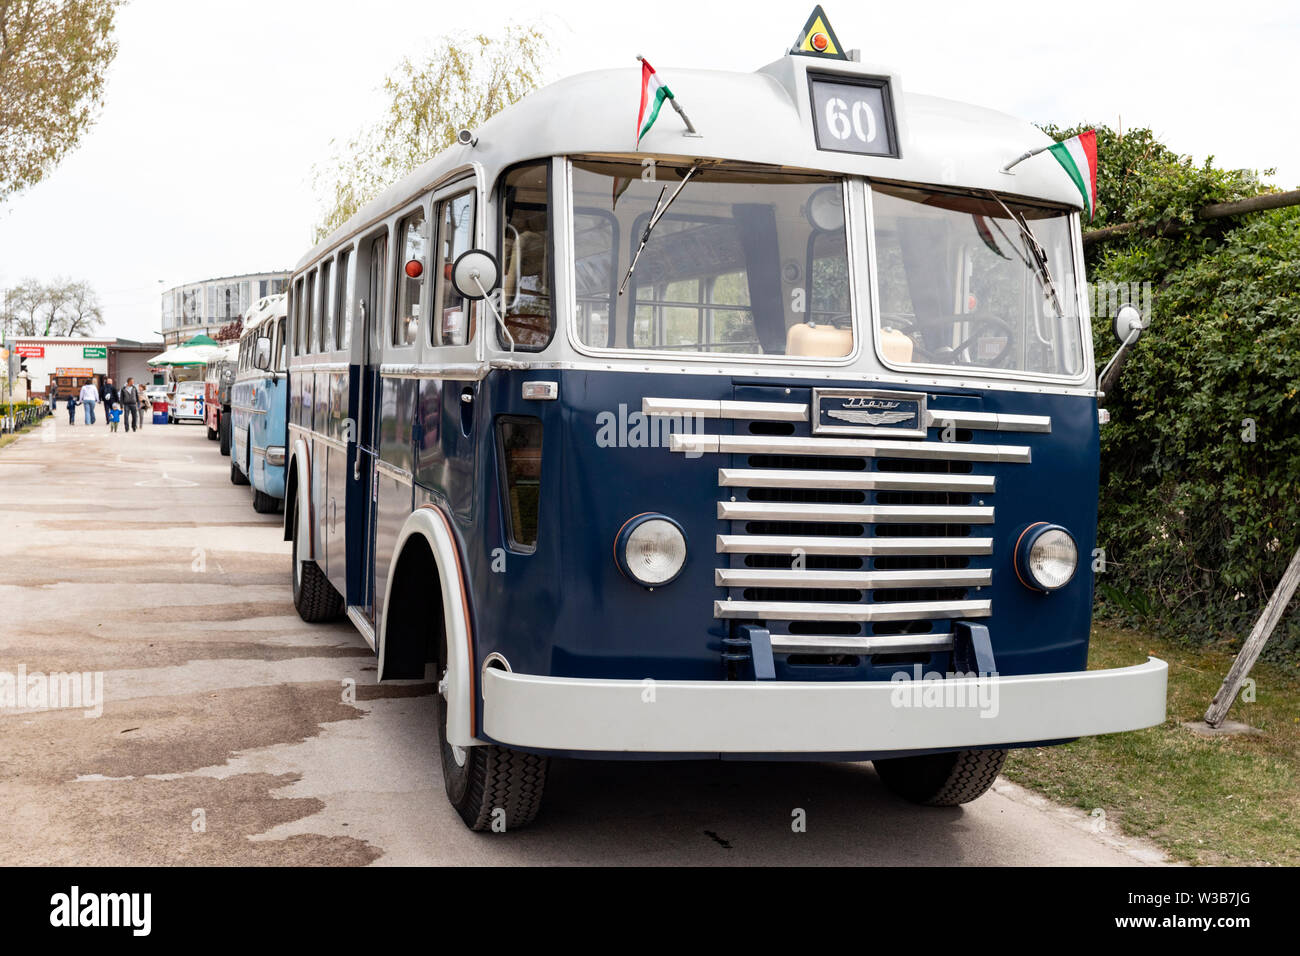 BUDAPEST, HUNGARY - April 05, 2019: Vintage classic Ikarus buses on display at an oldtomer automobile show. Front view. Stock Photo